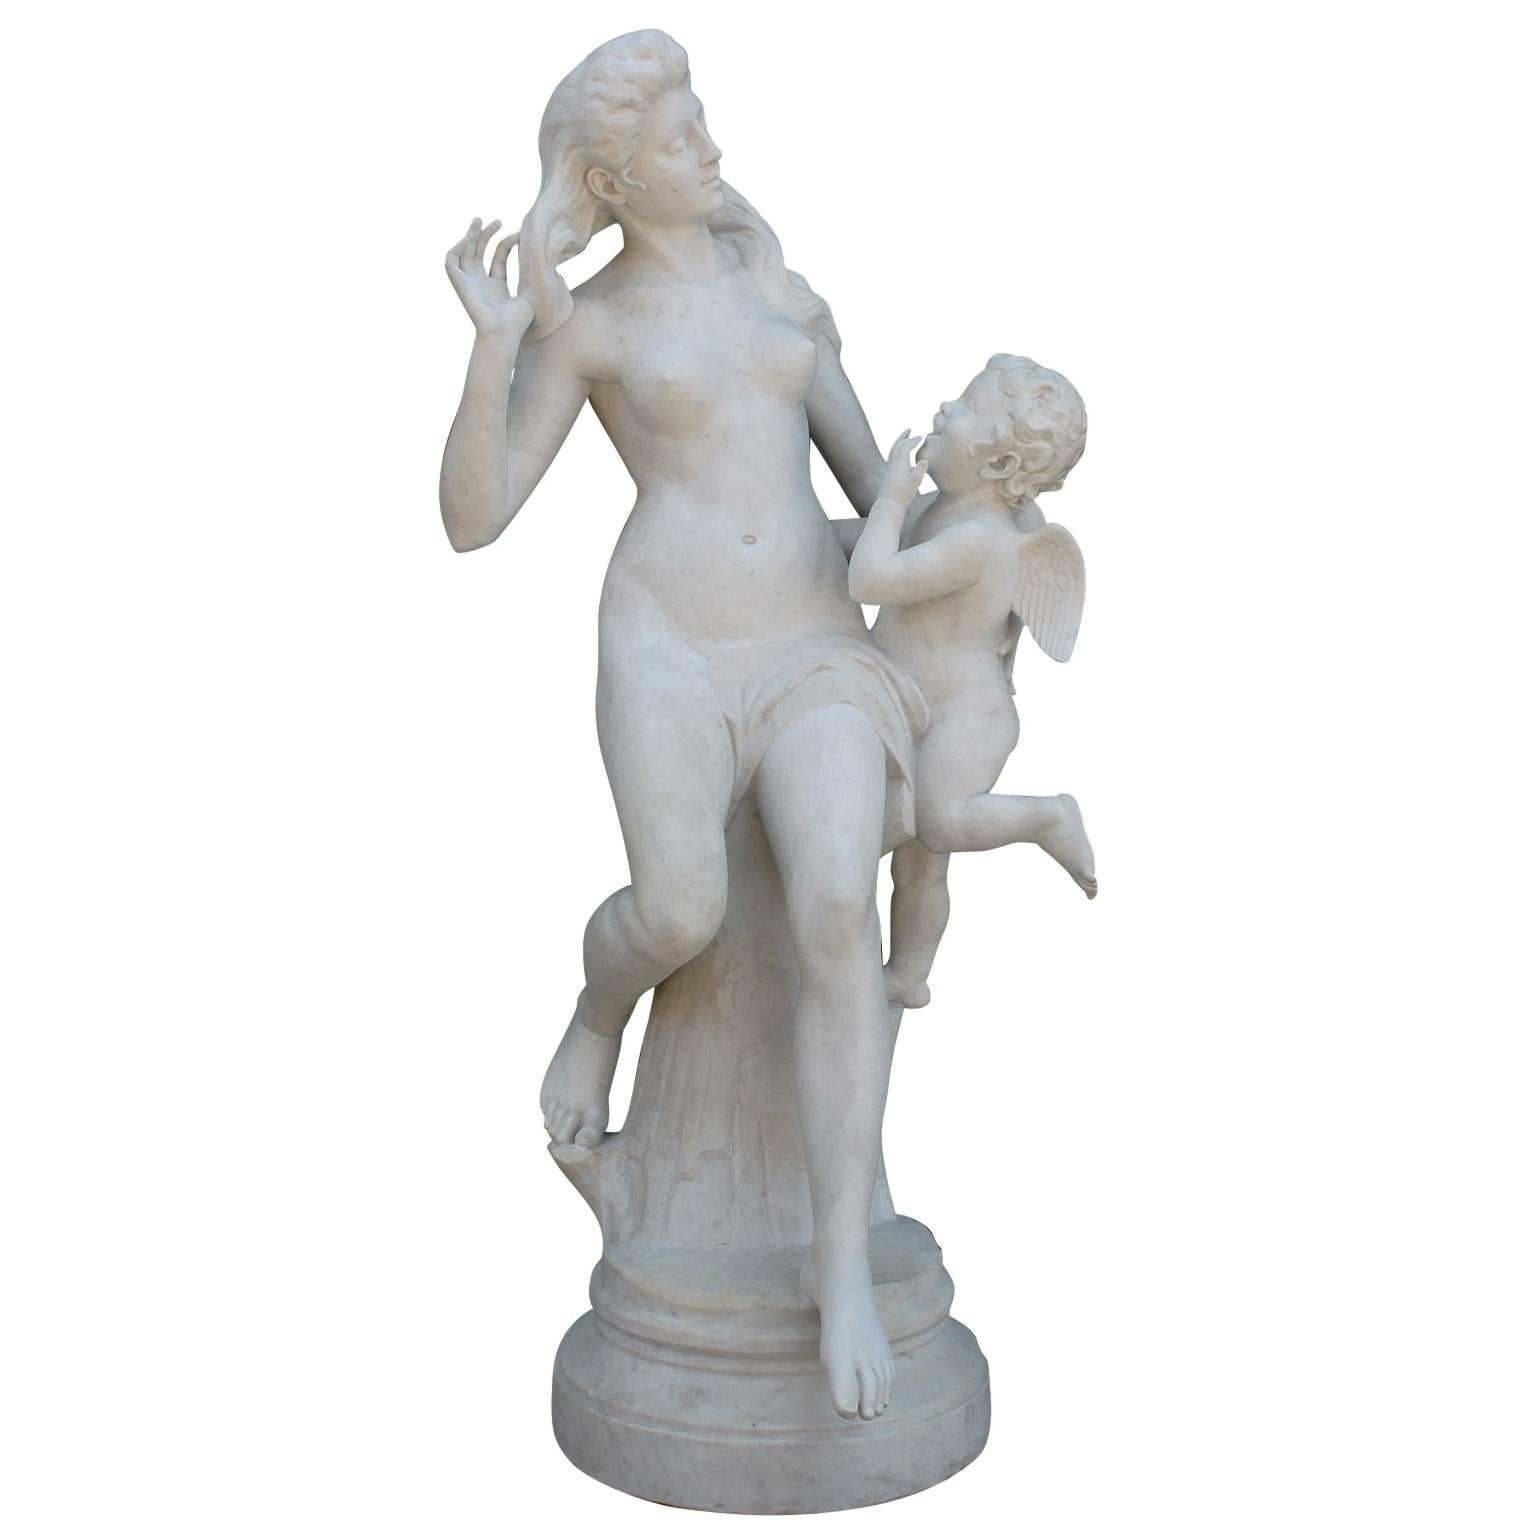 Lifesize French 19th-20th Century Carved Marble Sculpture of "Venus and Cupid" For Sale